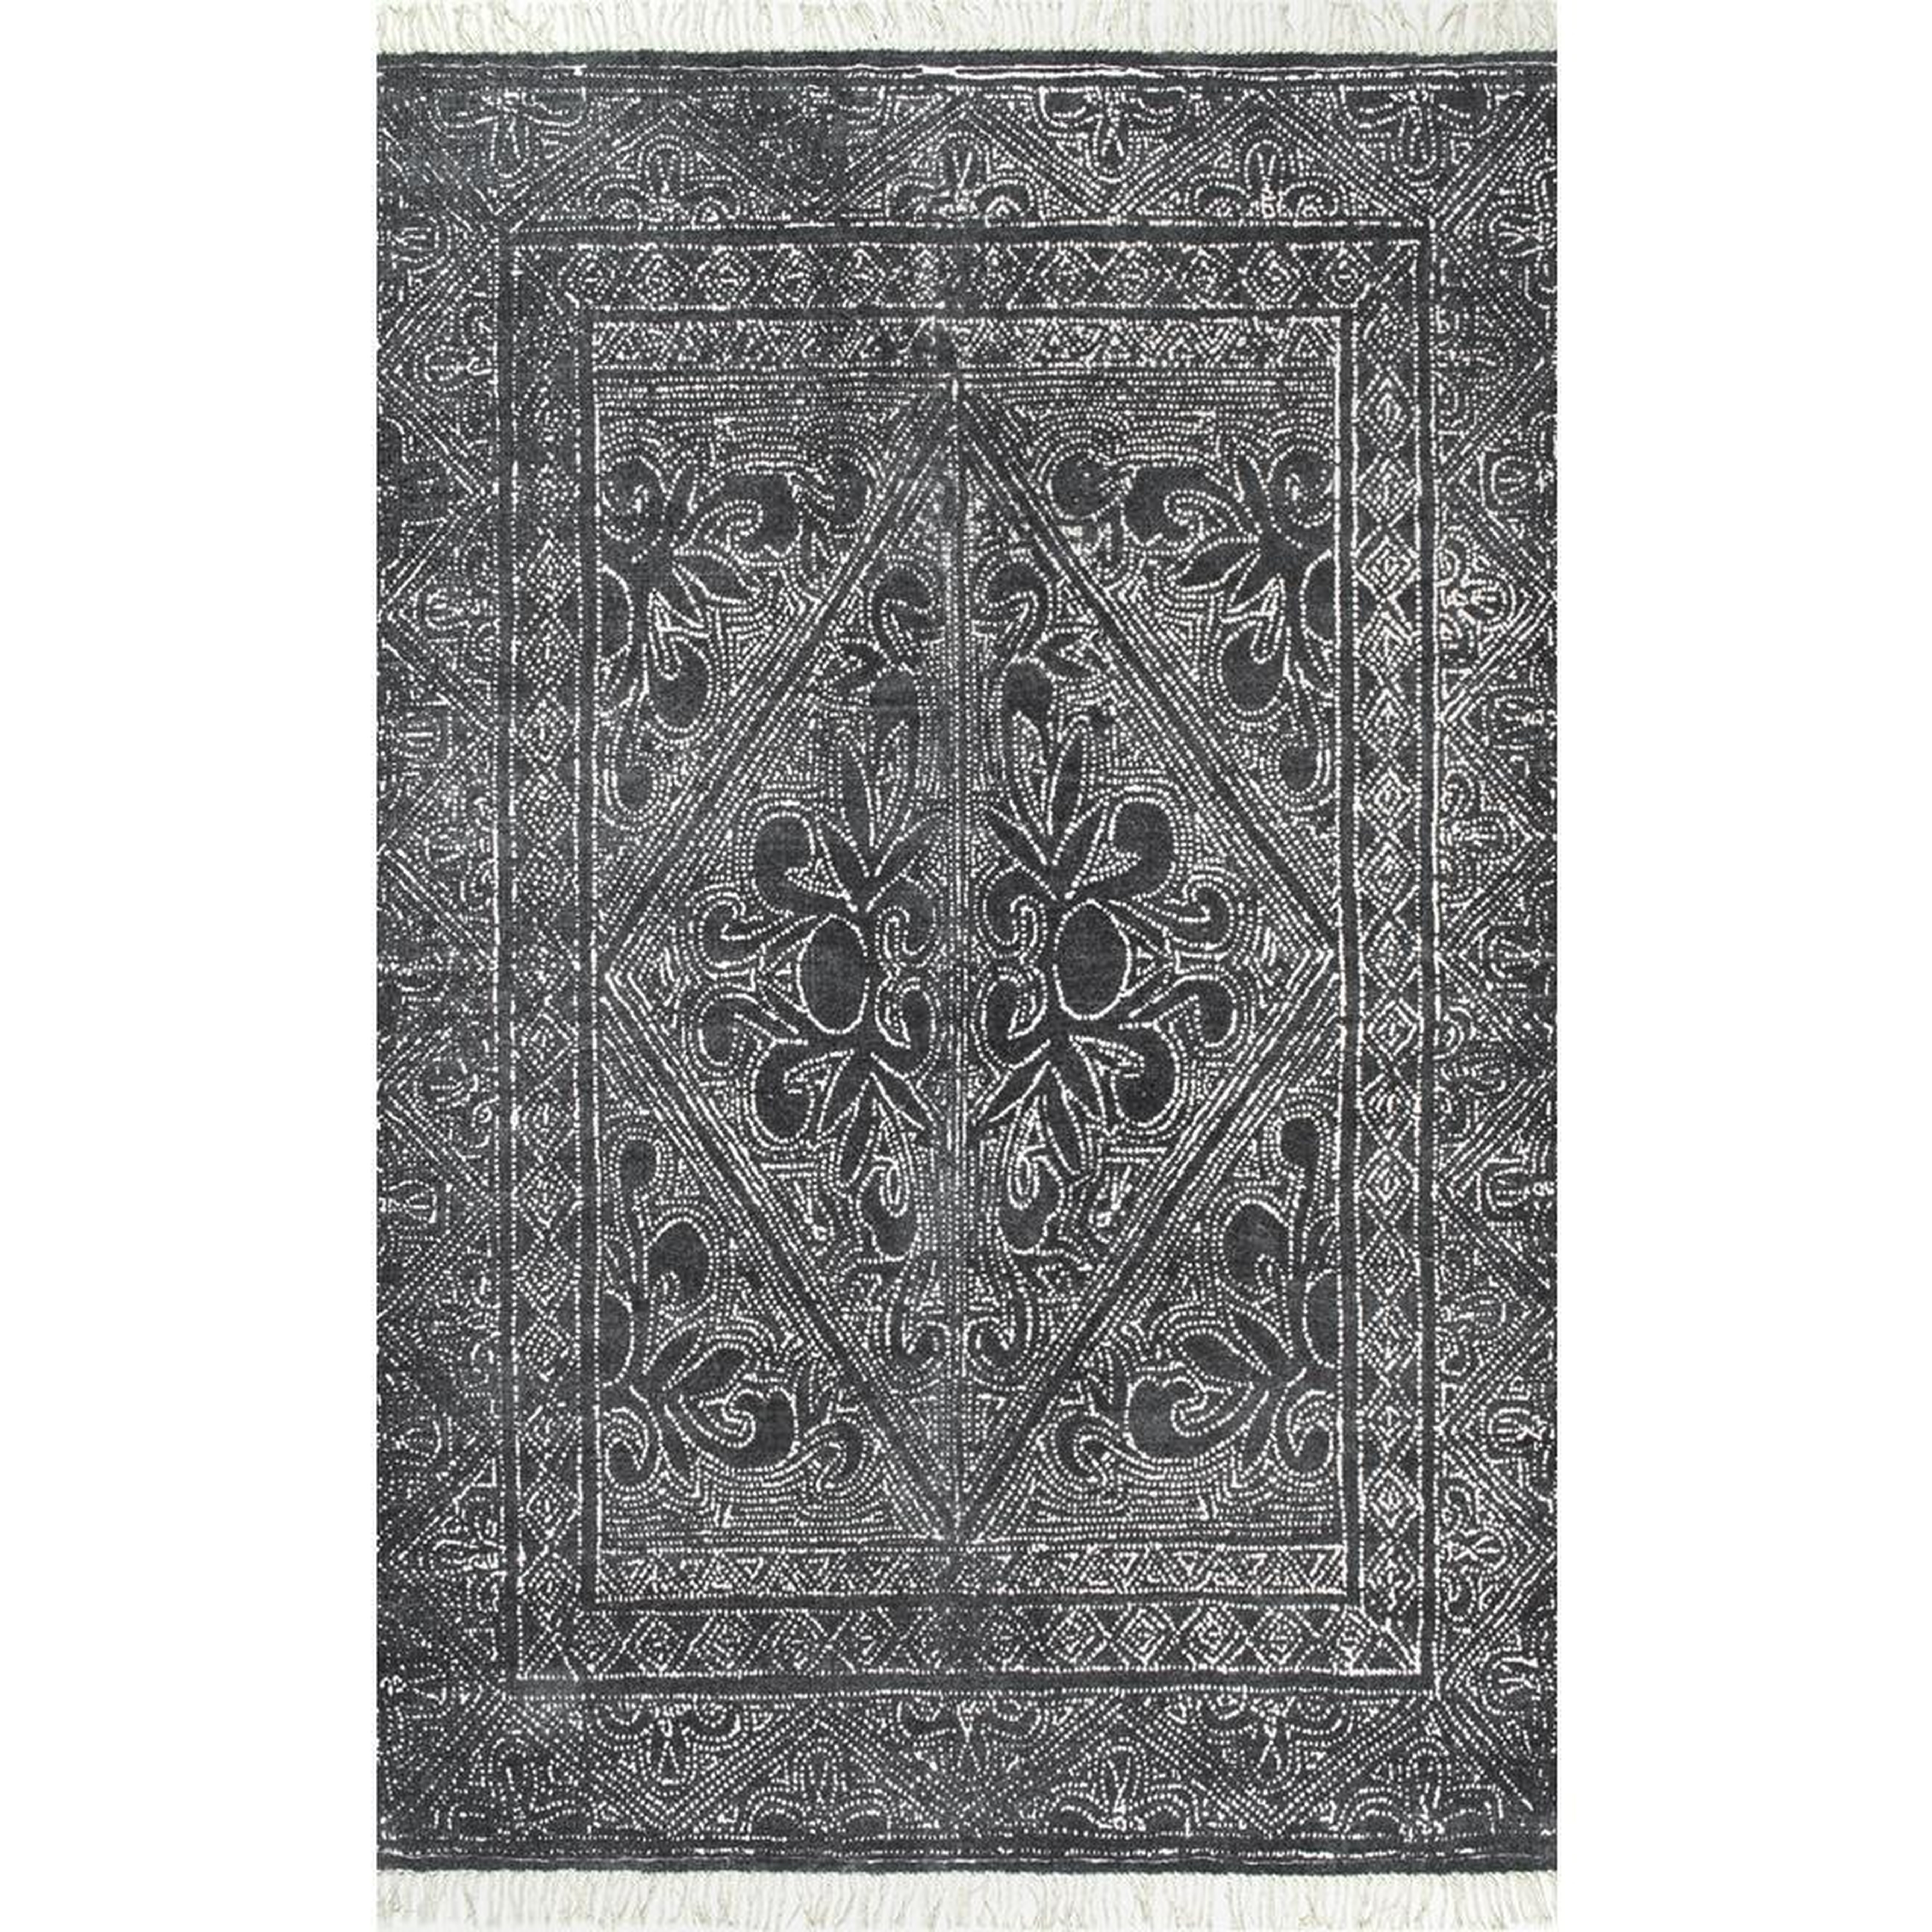 Lucette Rug, Black & Ivory, 7'6" x 9'6" - DISCONTINUED - Cove Goods